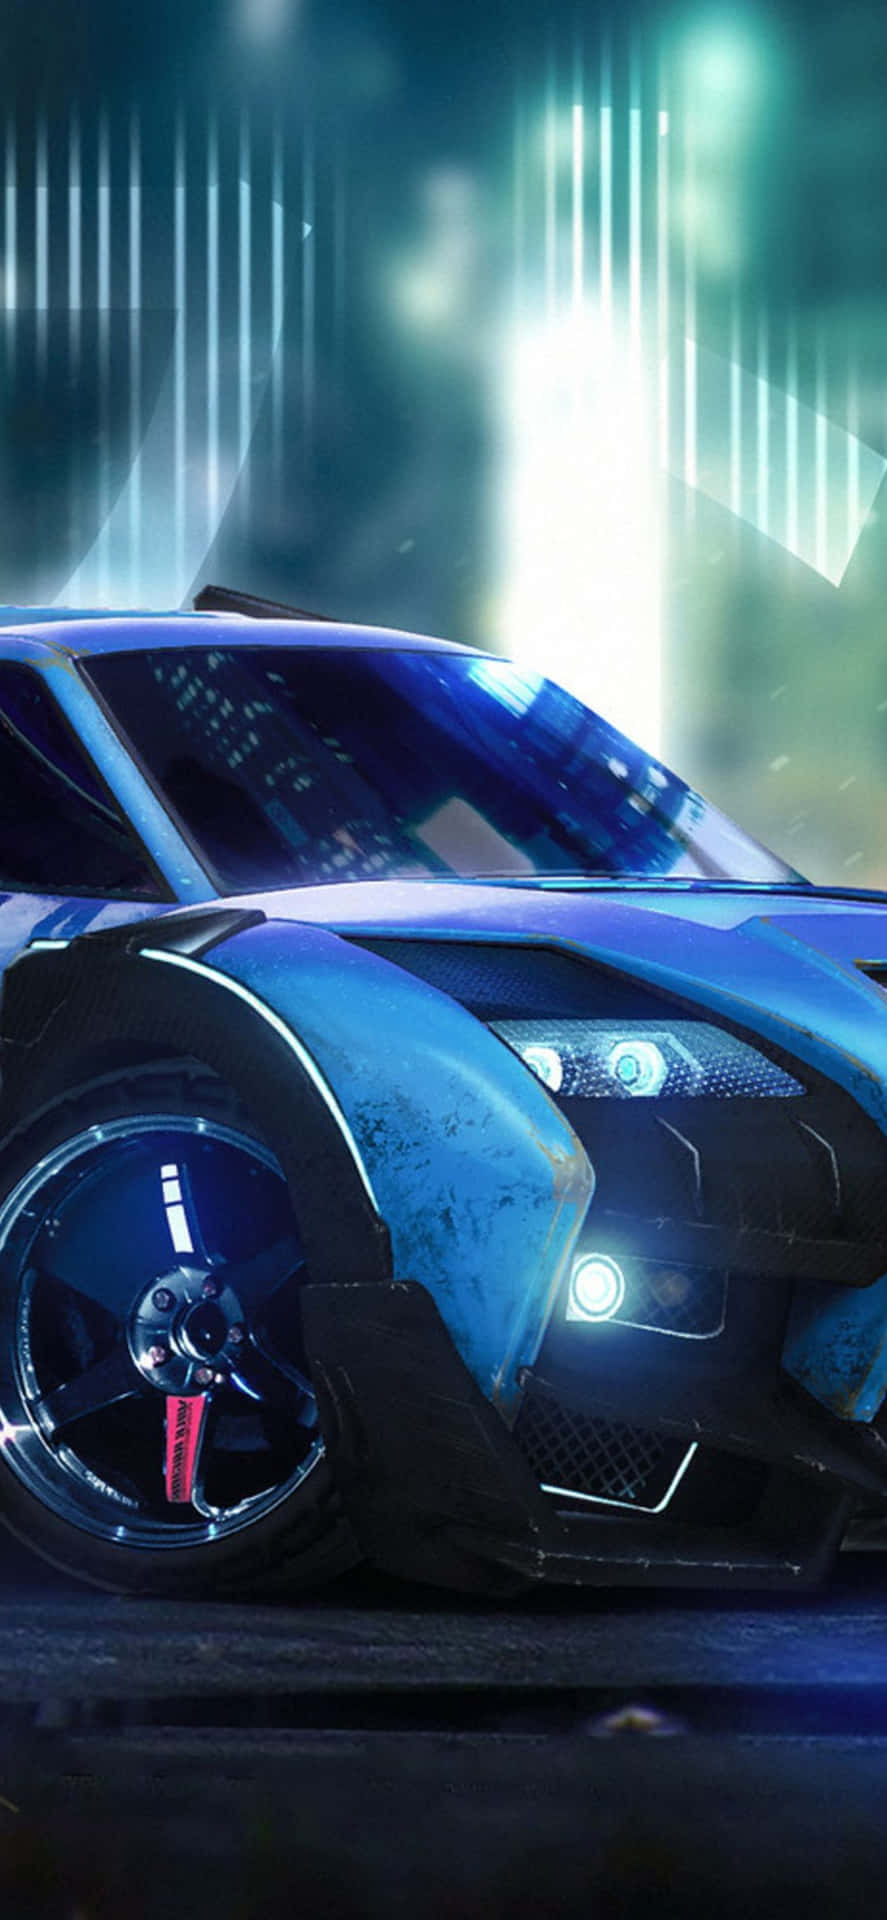 Iphone Xs Max Rocket League Background 1242 X 2688